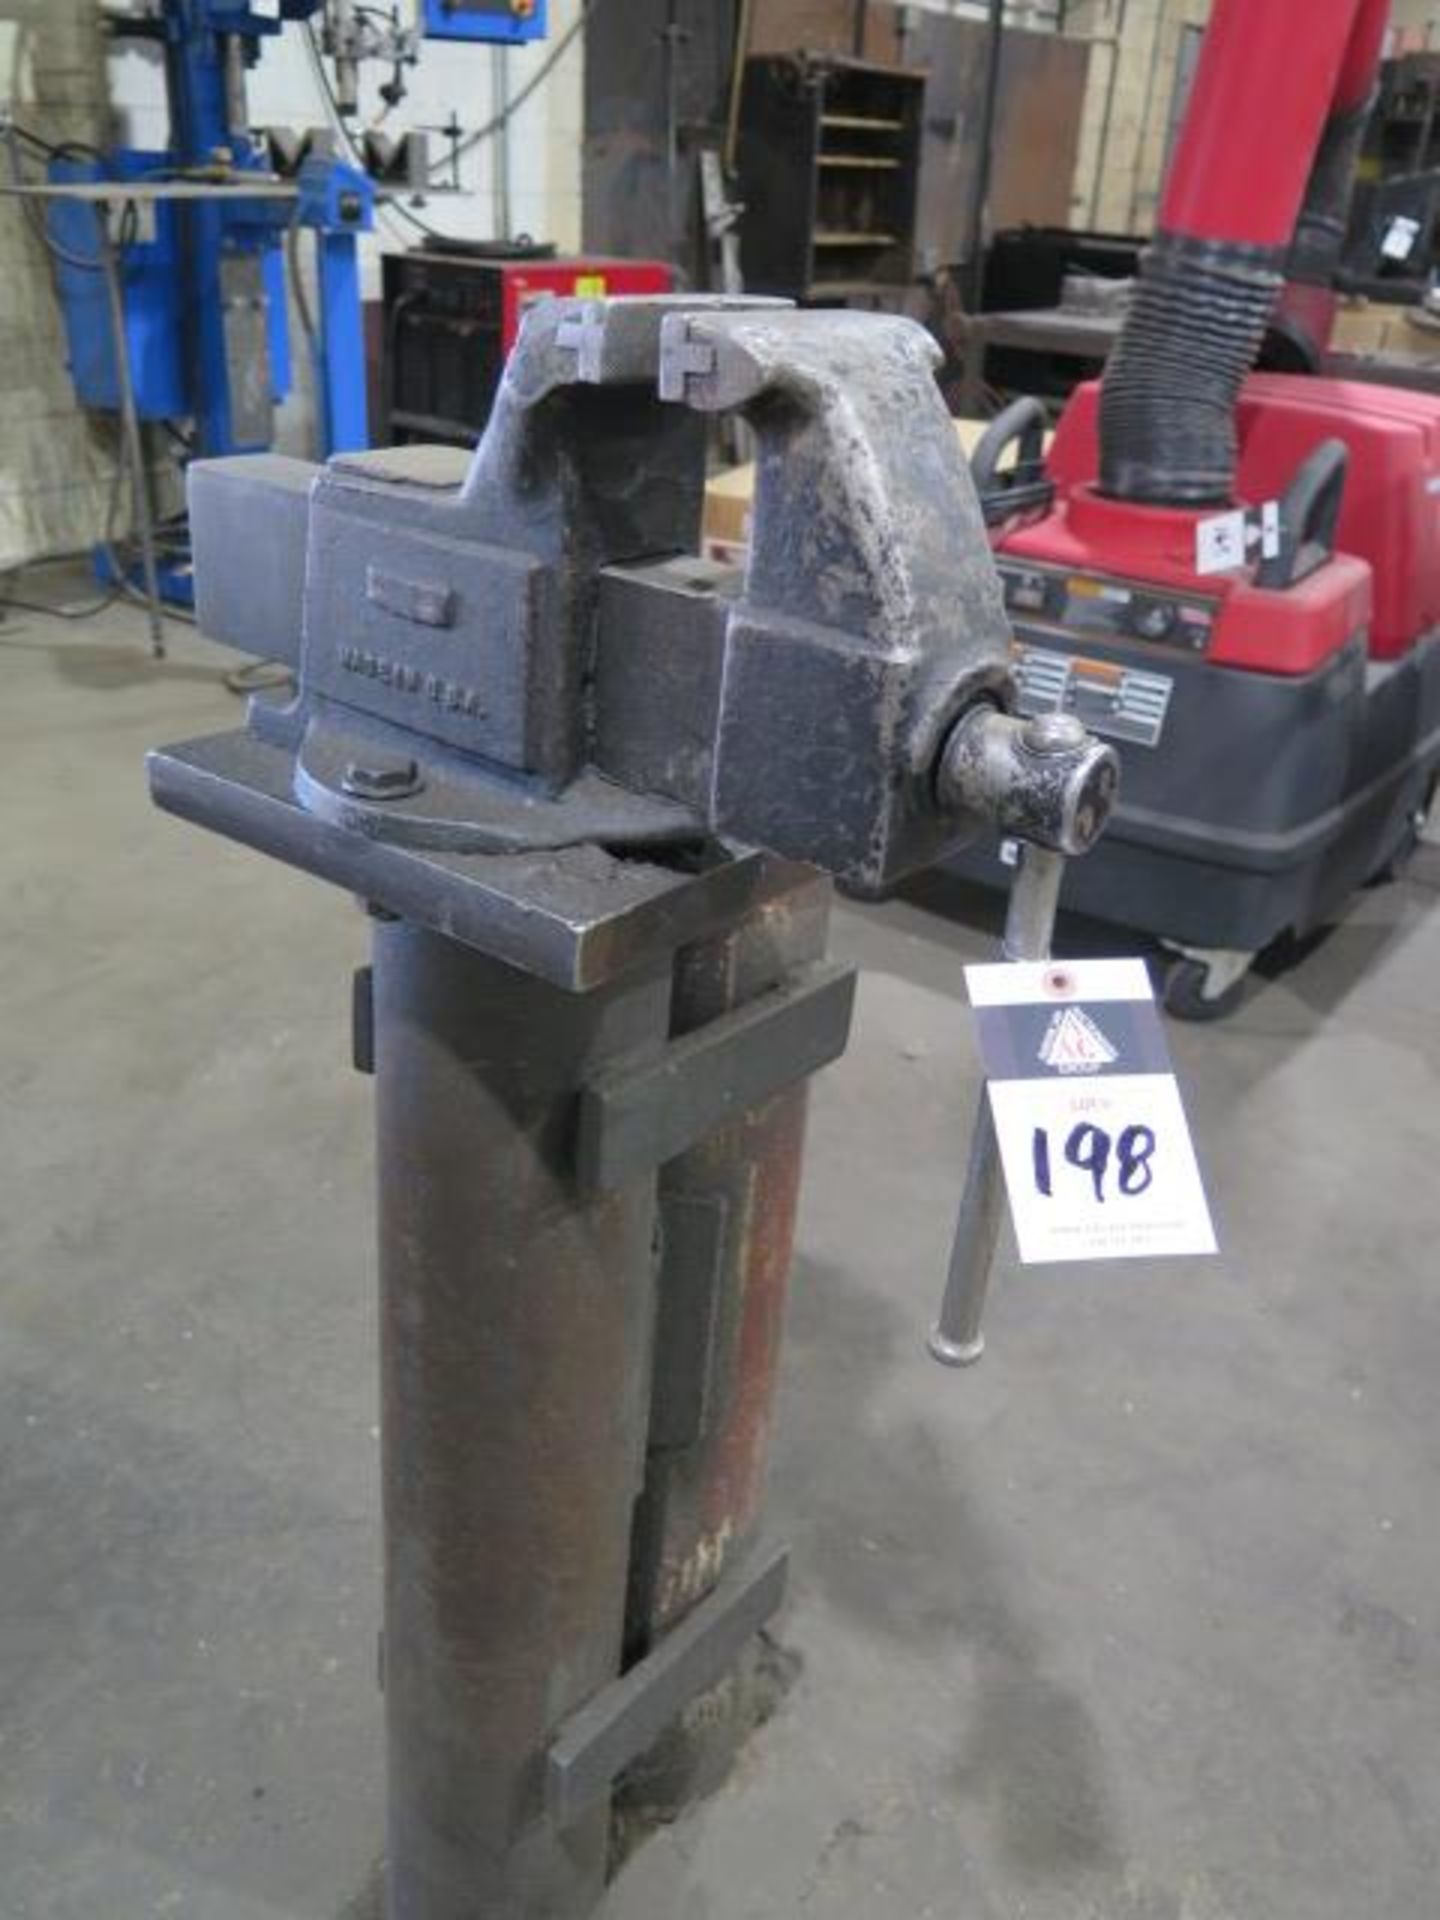 5" Bench Vise (SOLD AS-IS - NO WARRANTY)